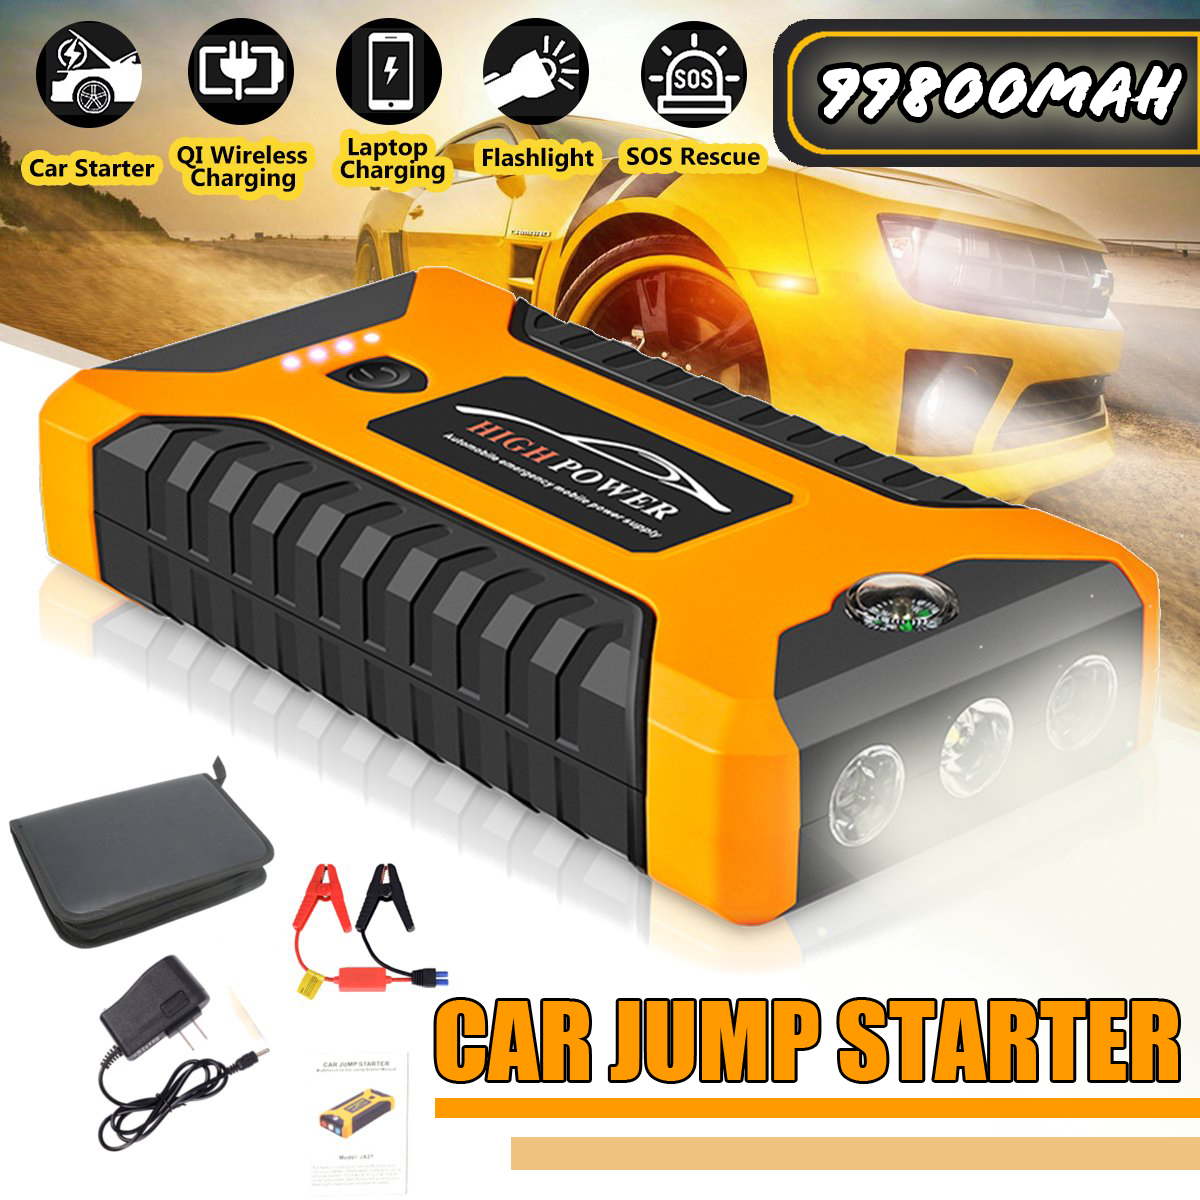 99800mah 600A Peak Car Jump Starter Lithium Battery with LED SOS Mode 12V Auto Battery Booster 1